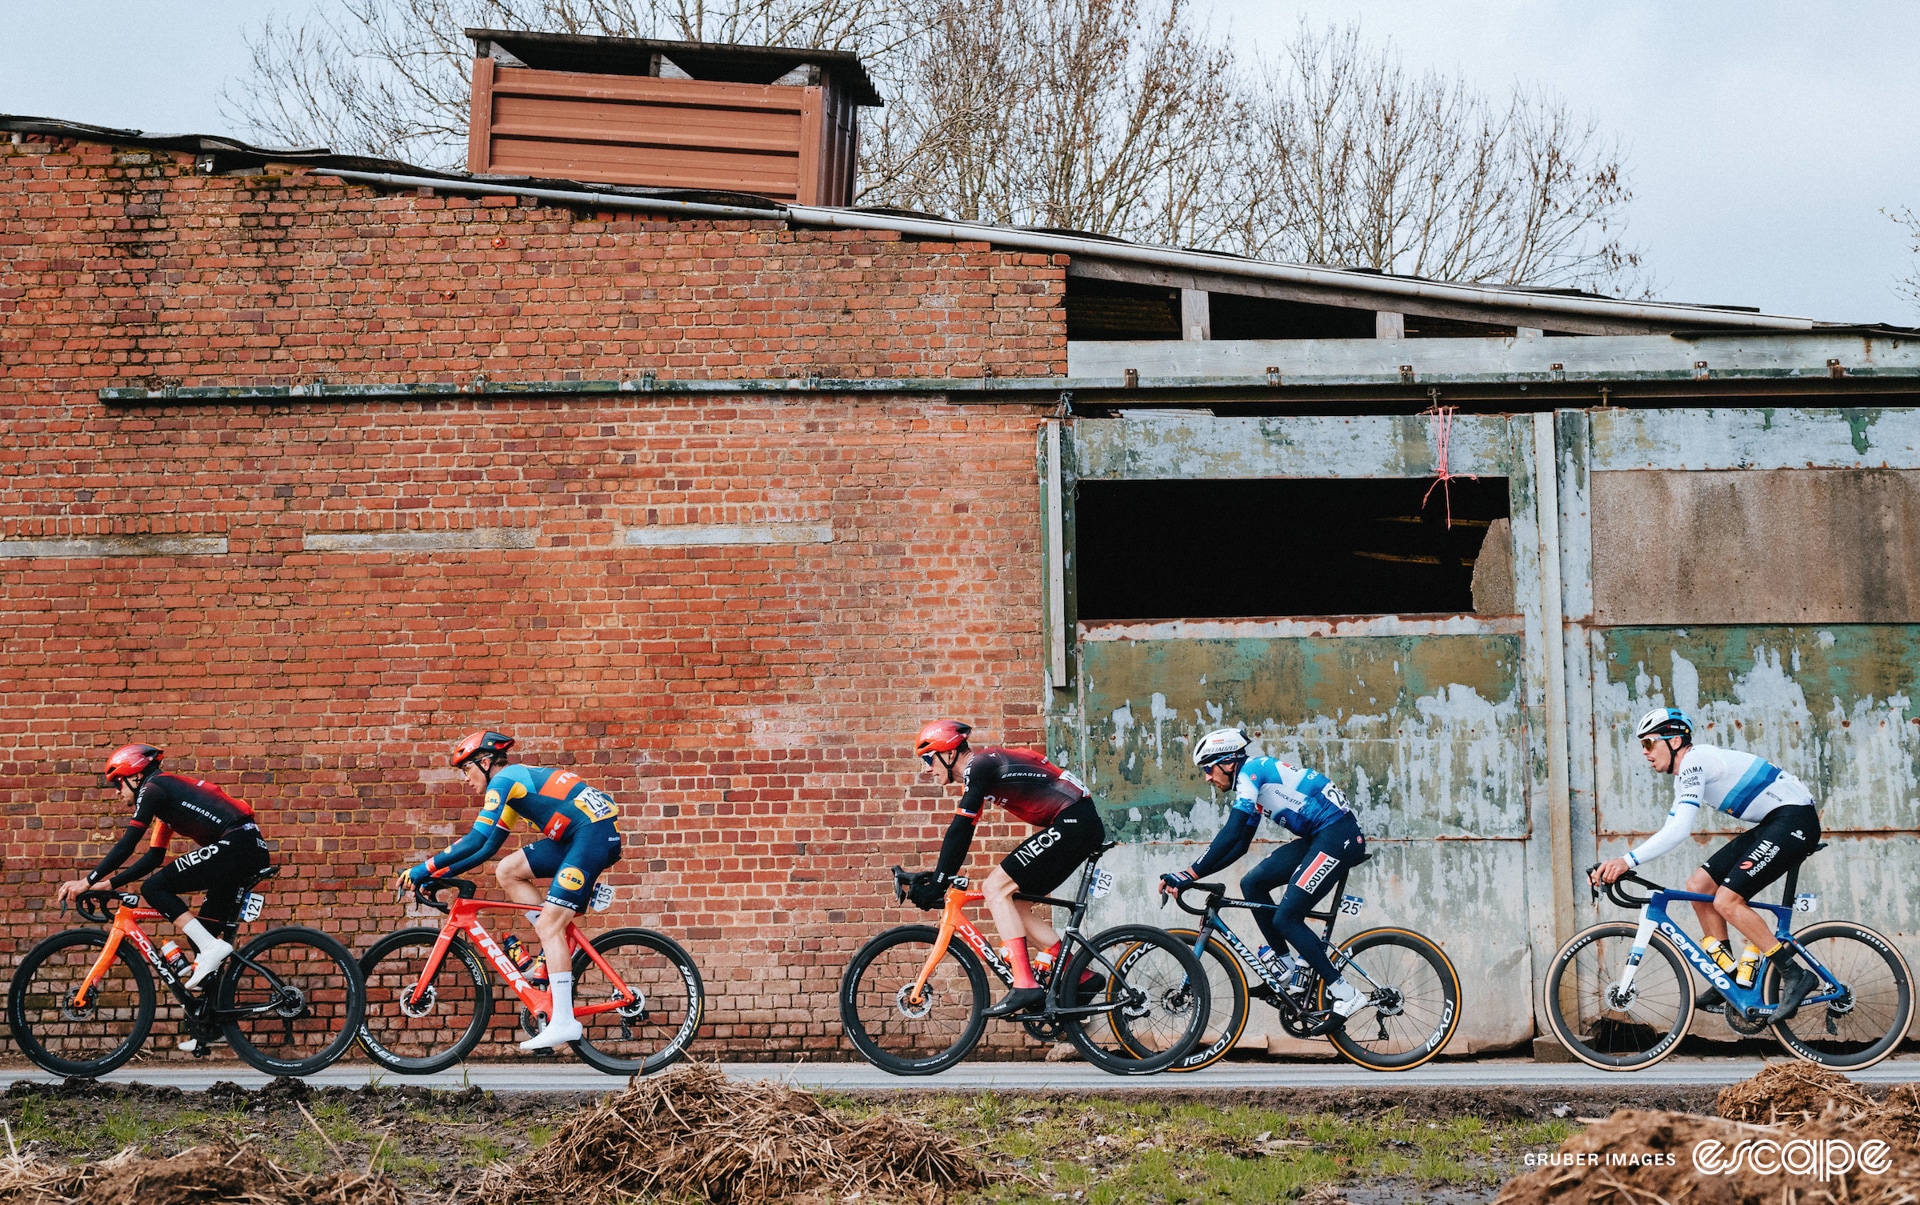 A handful of riders in front of a wall with interesting textures.